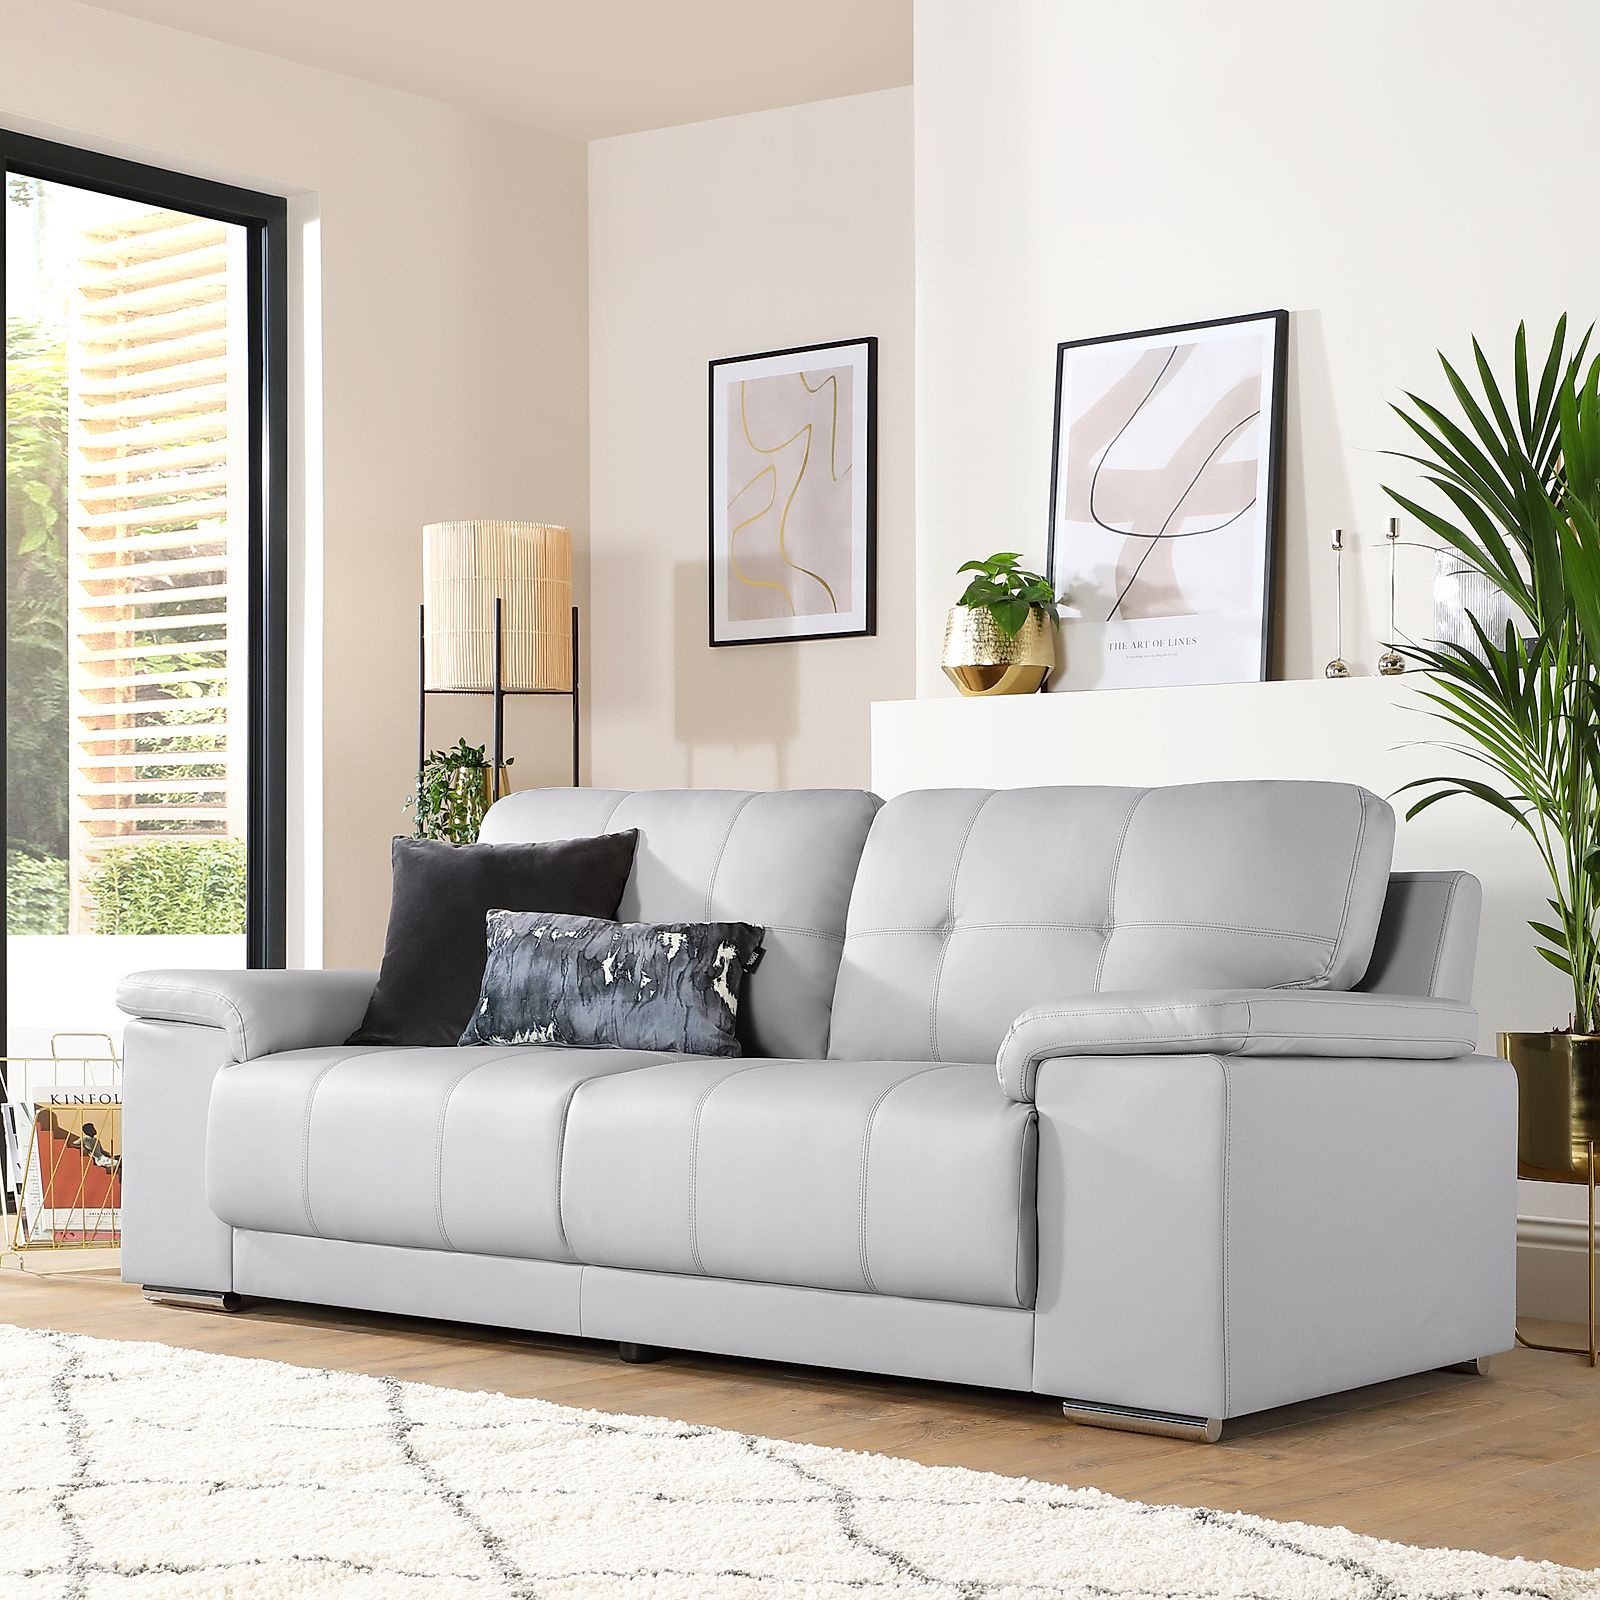 Kansas Light Grey Leather 3 Seater Sofa | Furniture Choice For Sofas In Light Grey (View 4 of 20)